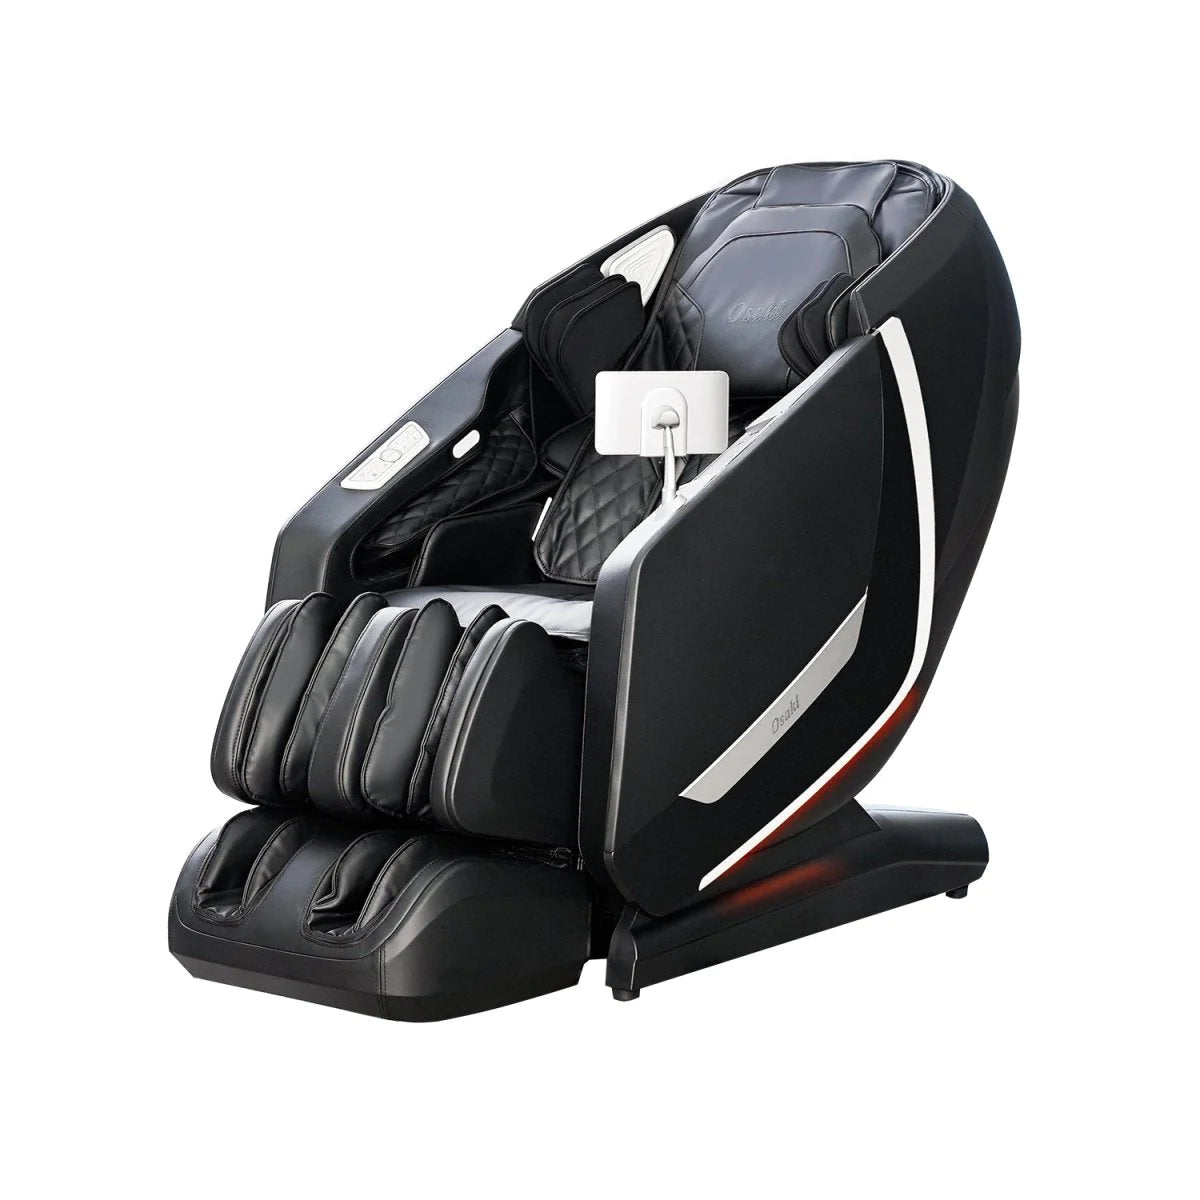 OP-Kairos 4D LT massage chair with Free massage chair cover and cleaner